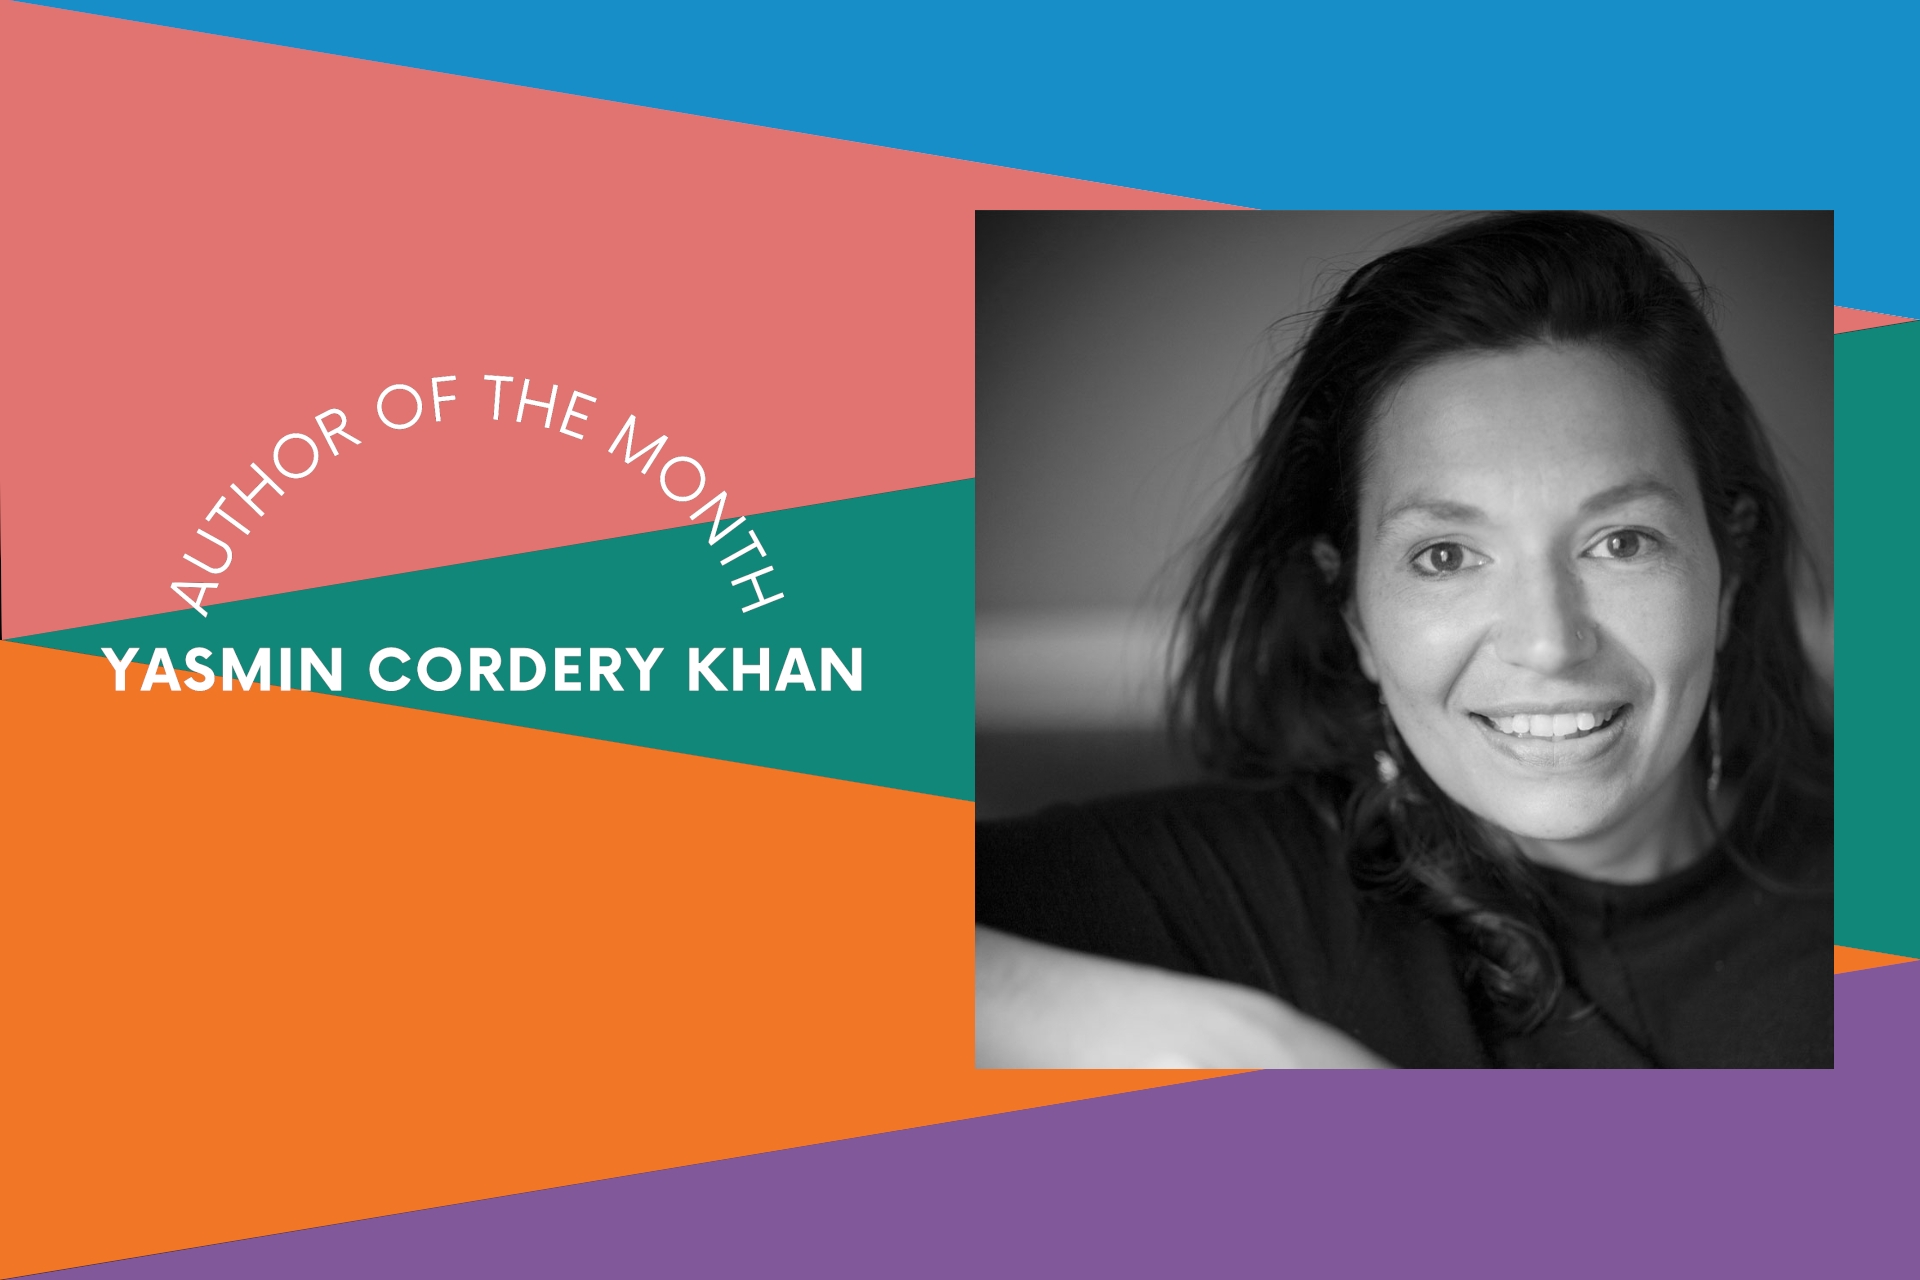 Author of the Month: Yasmin Cordery Khan